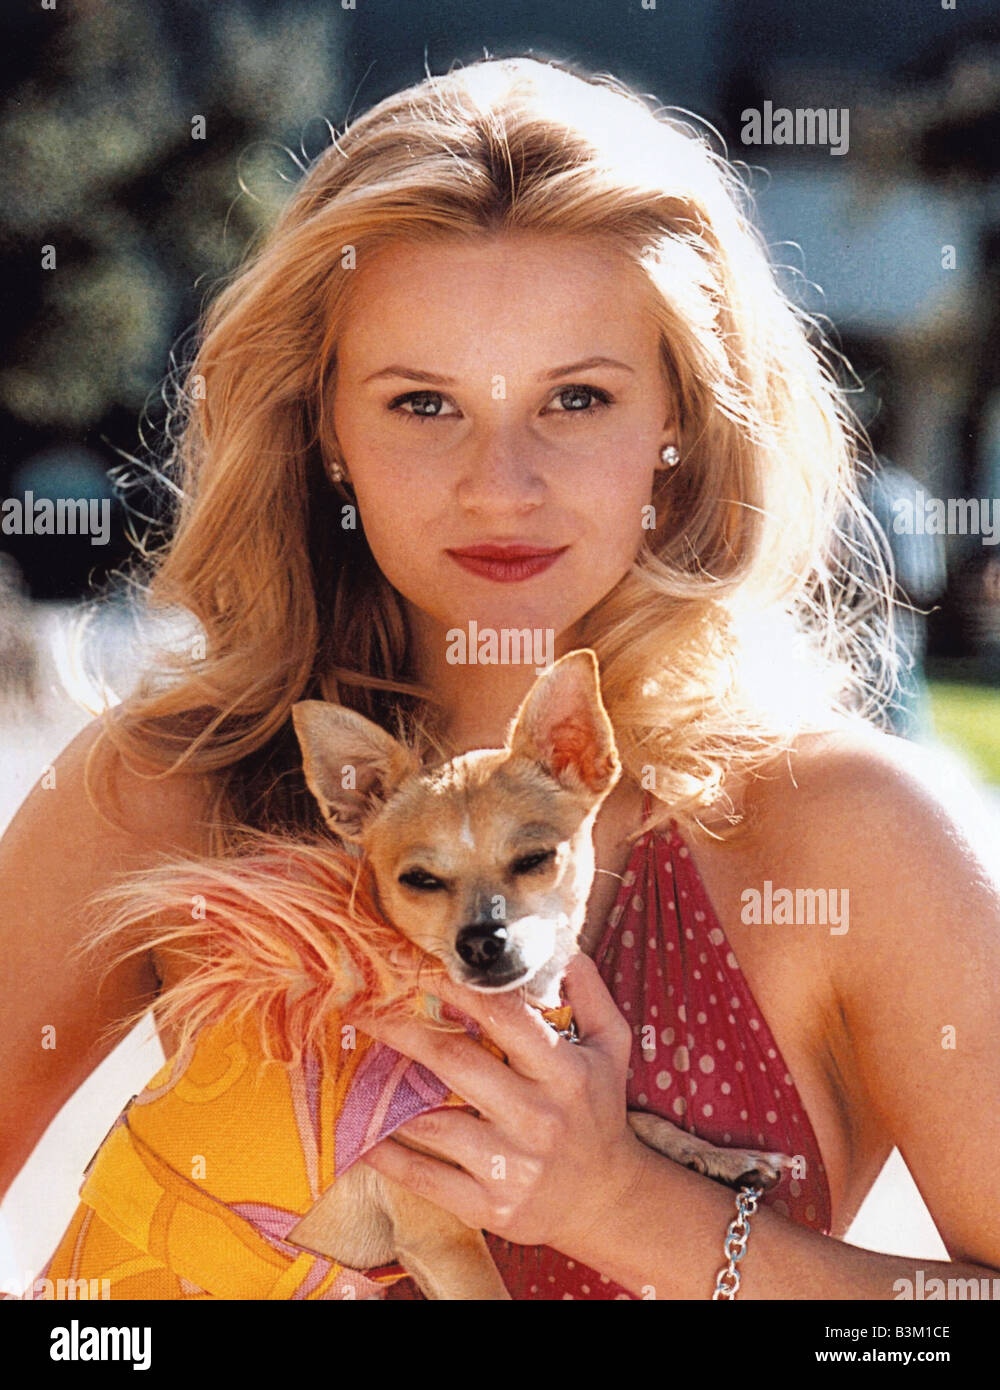 Legally Blonde 2: Red, White & Blonde (2003) on IMDb: Movies, TV,  Celebs, and more